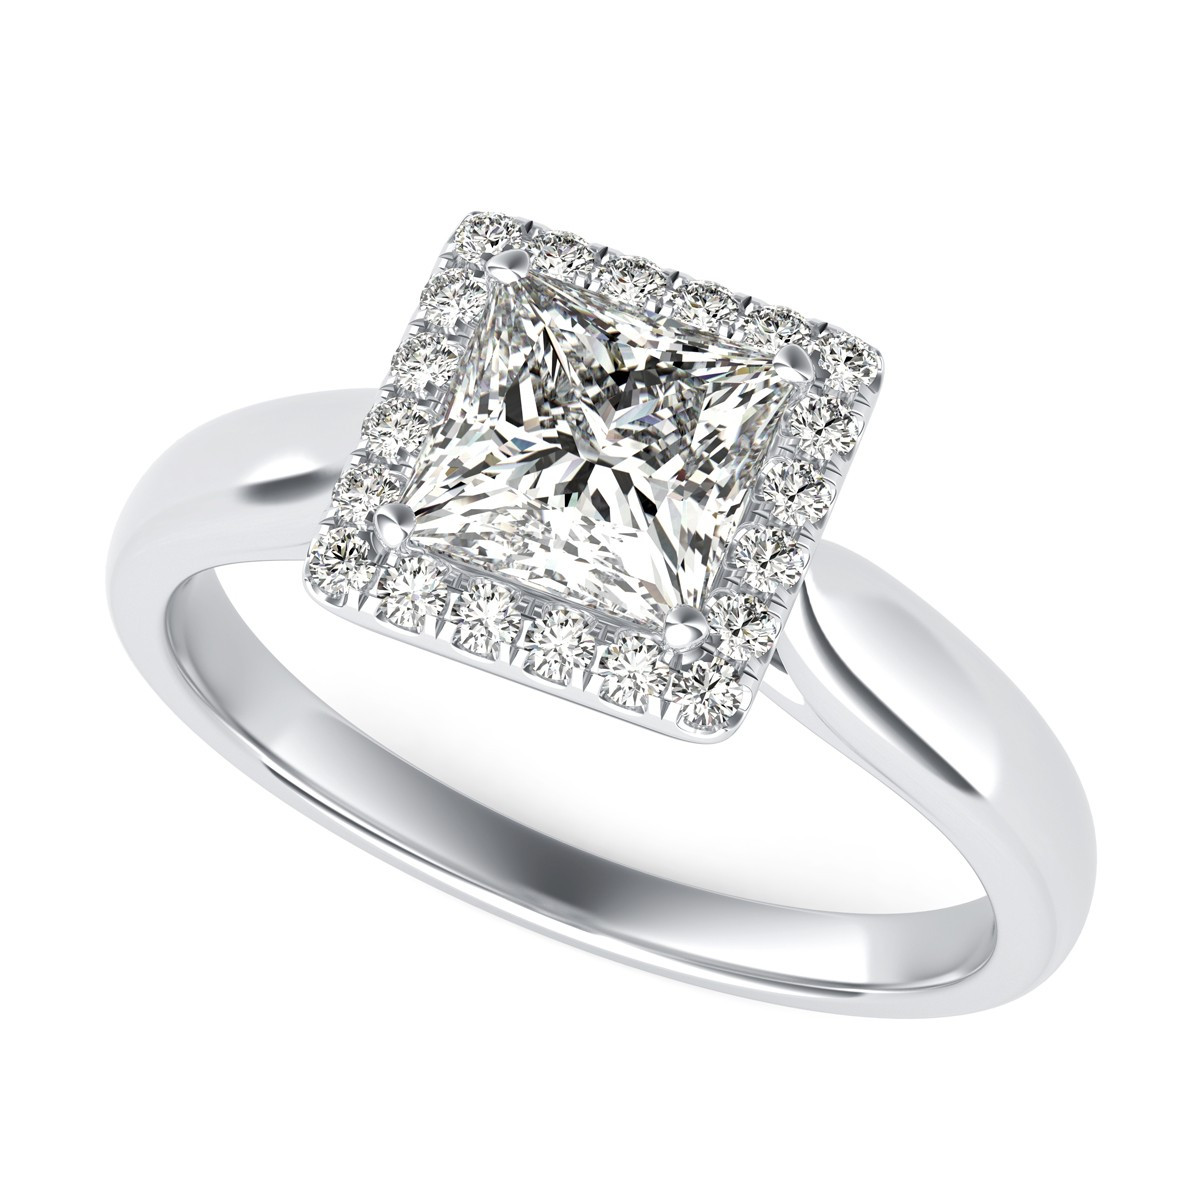 Princess Cut With Halo Engagement Rings
 Halo Diamond Engagement Ring